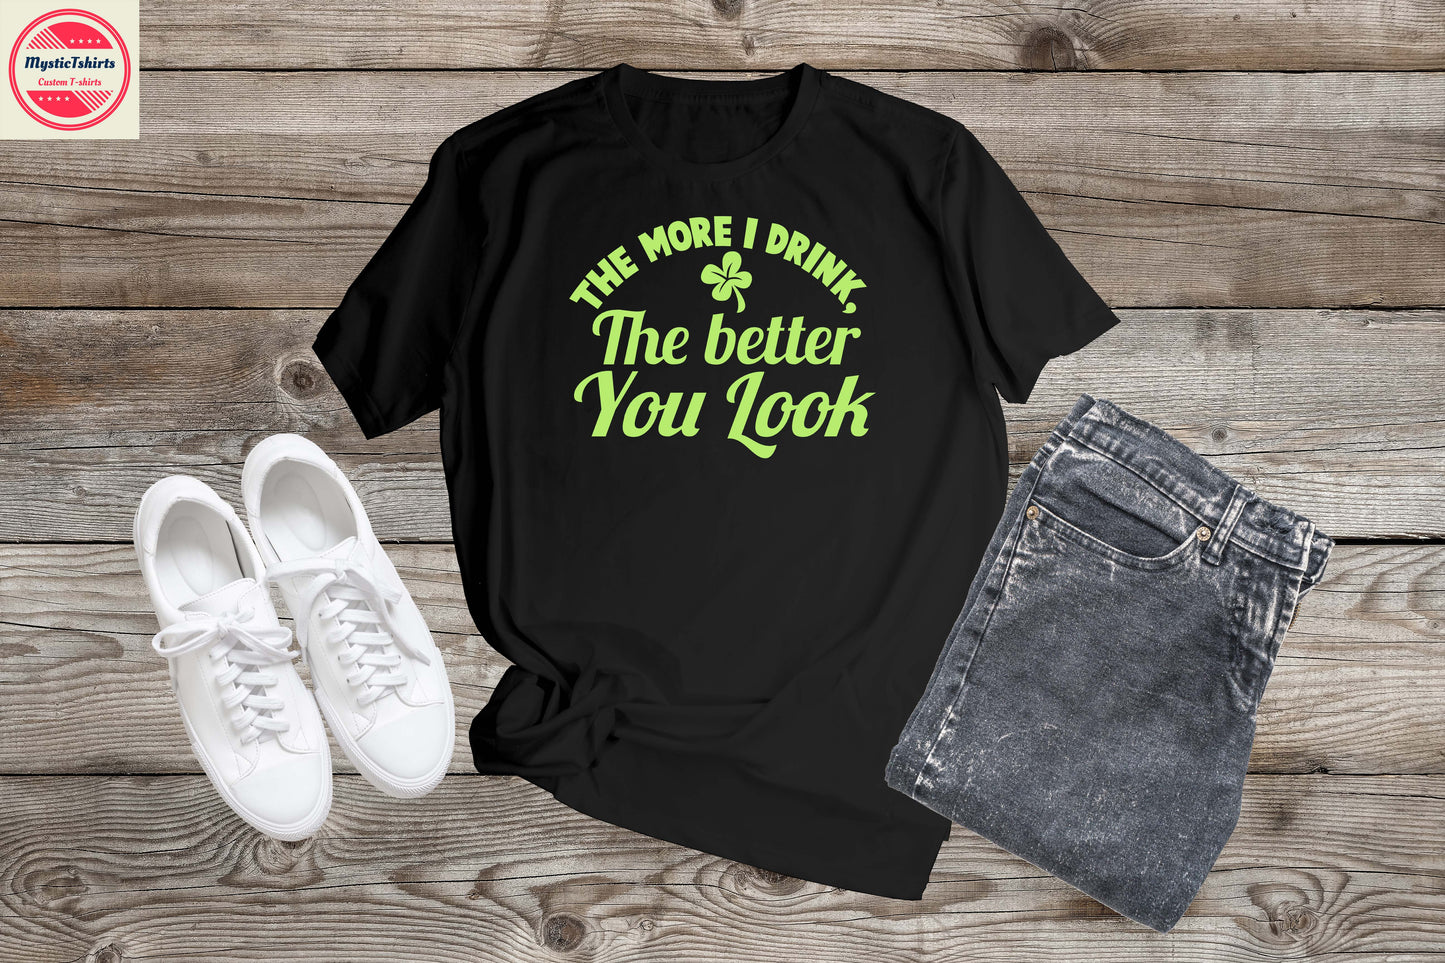 453. THE MORE I DRINK THE BETTER YOU LOOK, Custom Made Shirt, Personalized T-Shirt, Custom Text, Make Your Own Shirt, Custom Tee